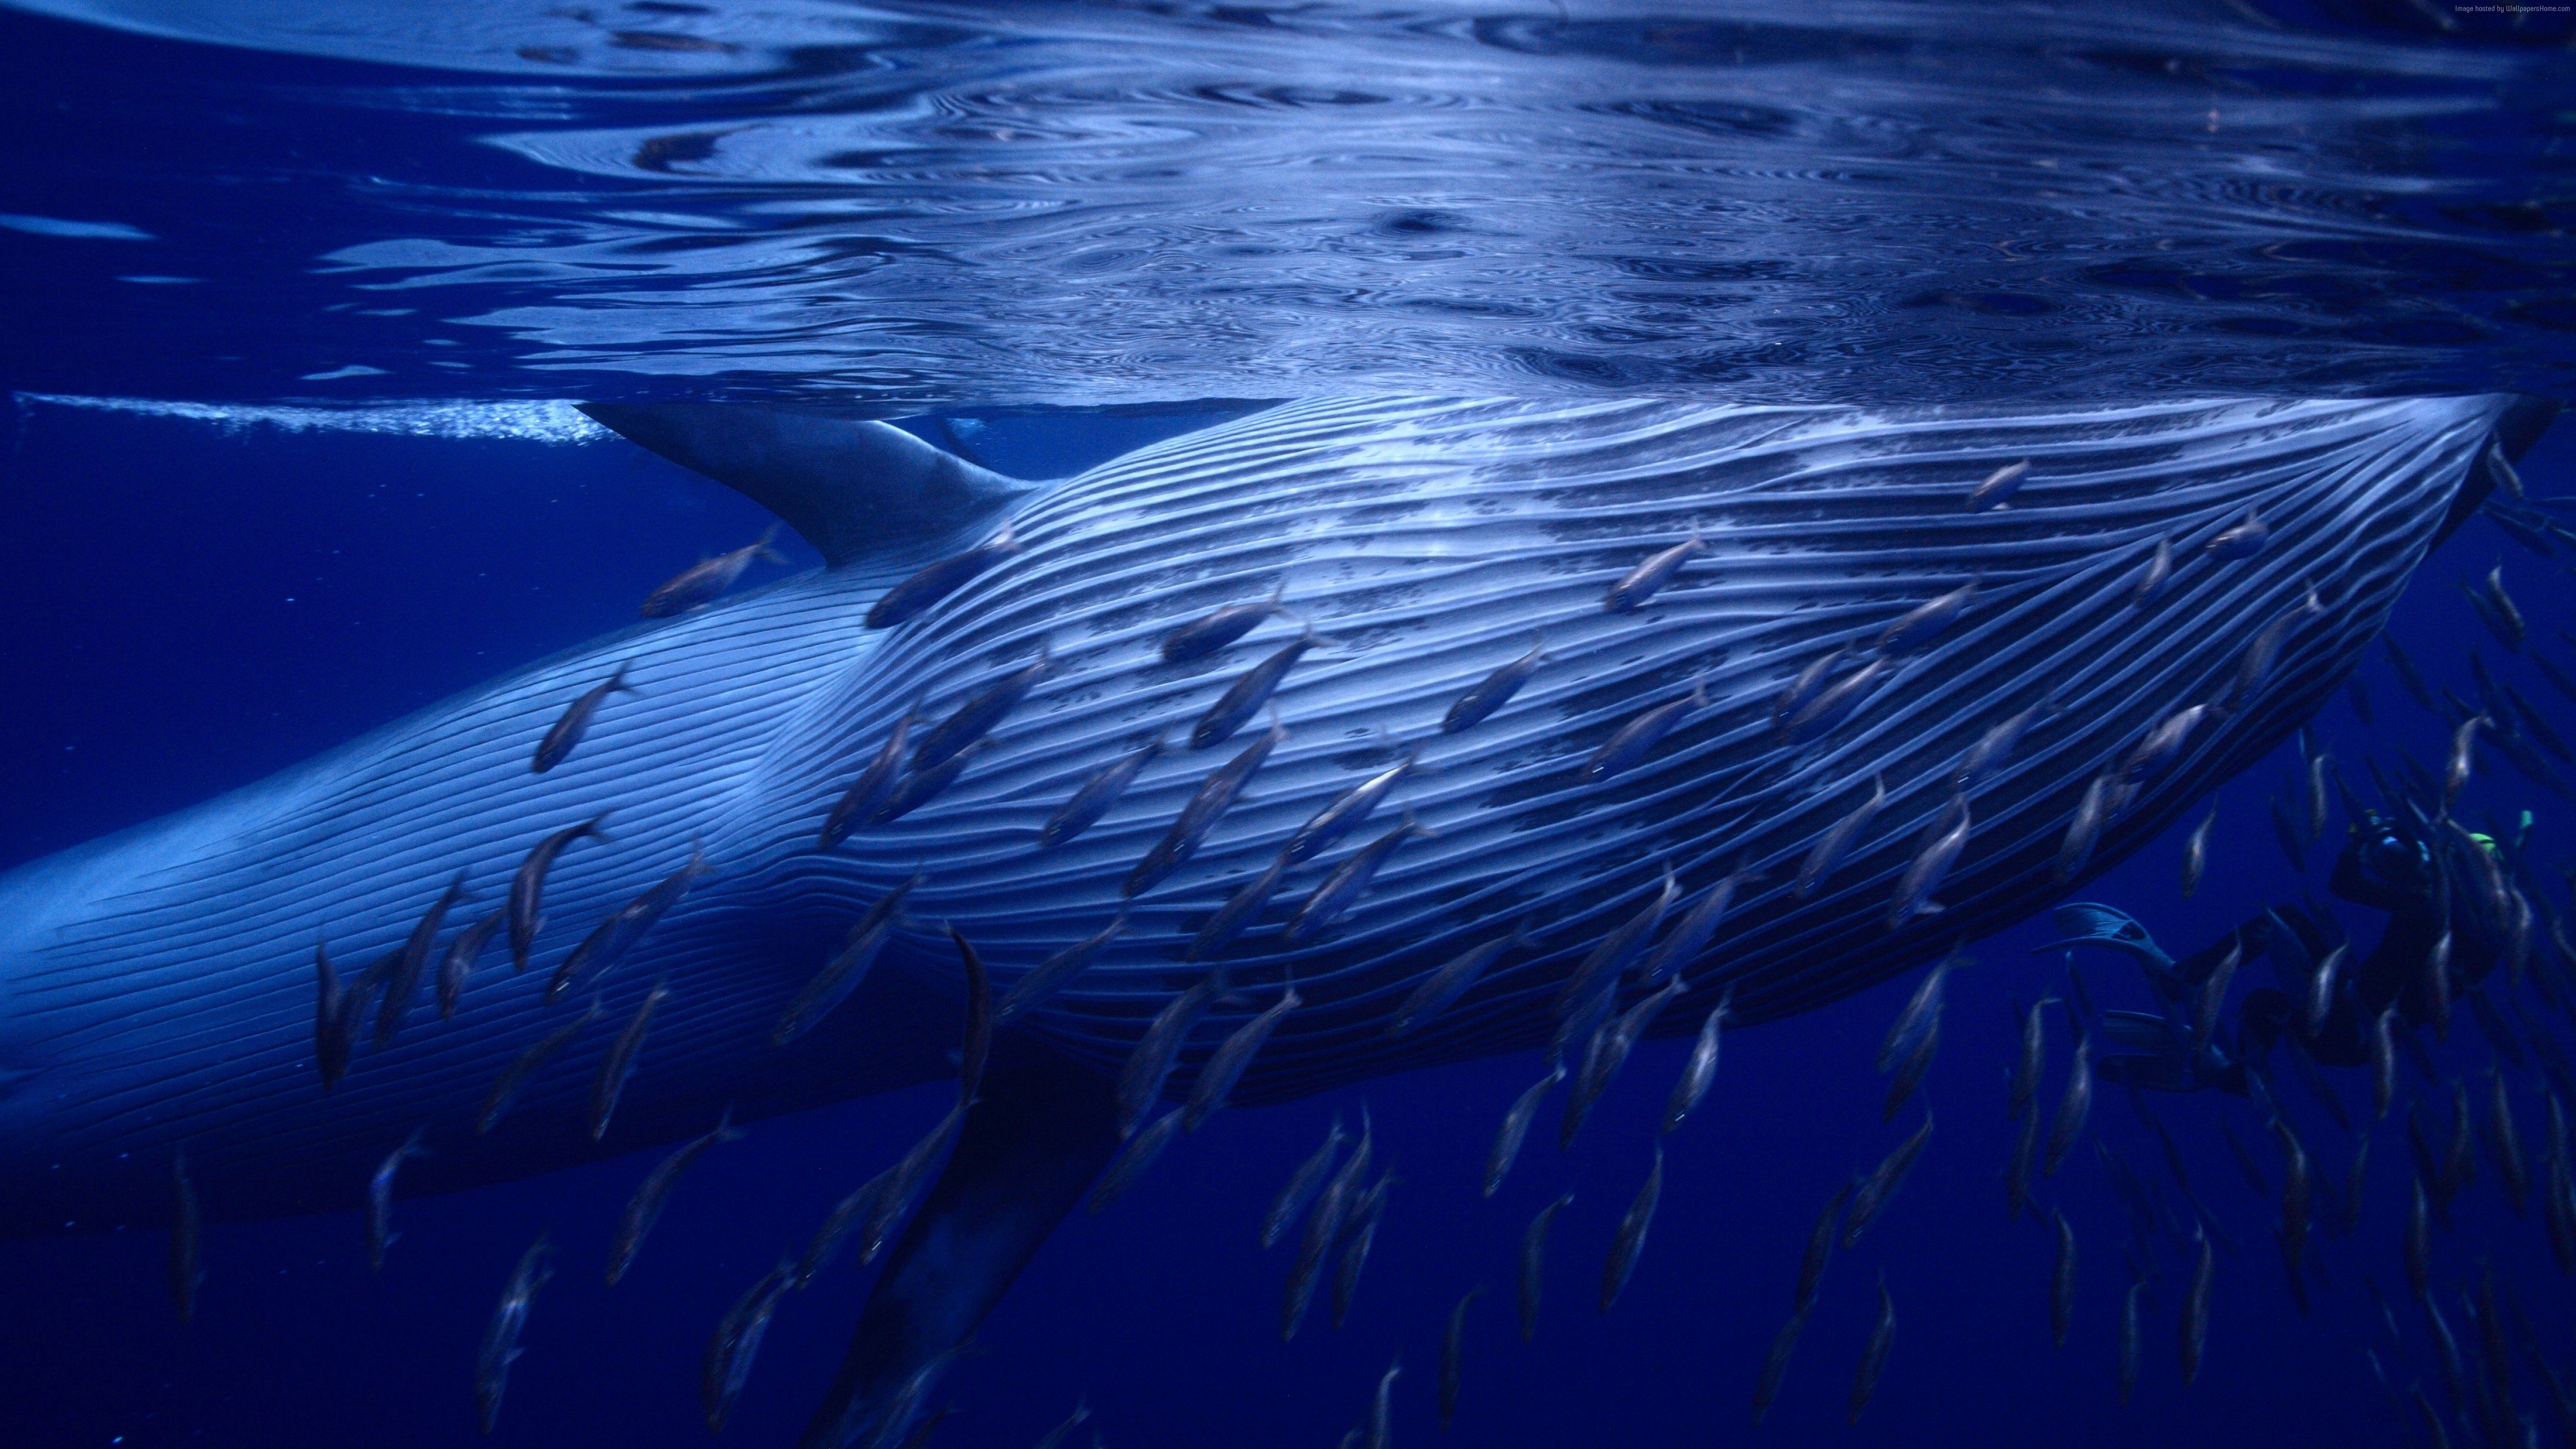 Whale Underwater Best Diveng Places 5k k #aquaticecosystem #aquaticlife #Best #Diveng #Nature #oceananimals #Photography. Bryde's whale, Whale, Save the whales